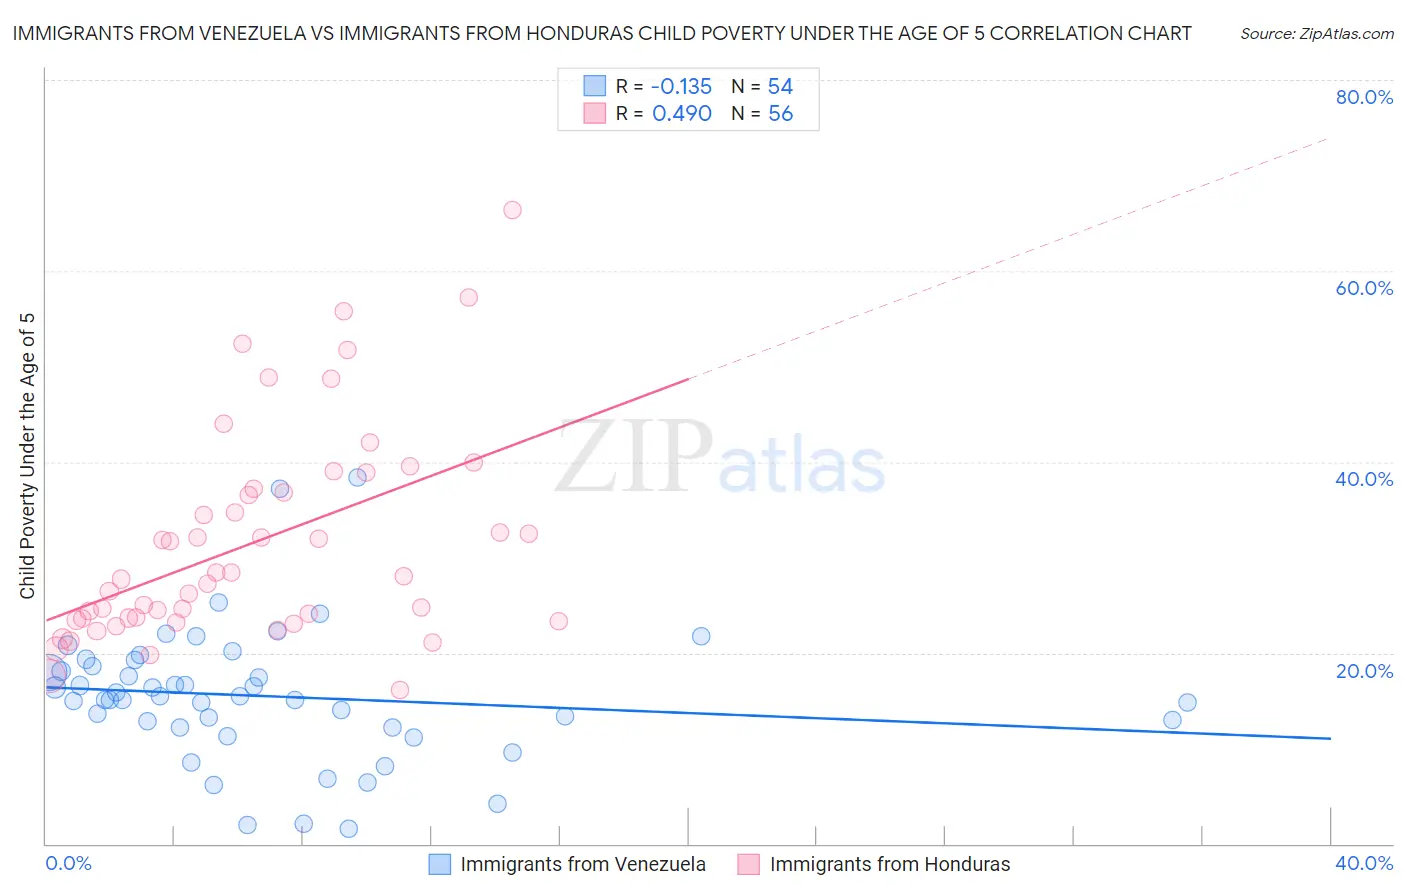 Immigrants from Venezuela vs Immigrants from Honduras Child Poverty Under the Age of 5